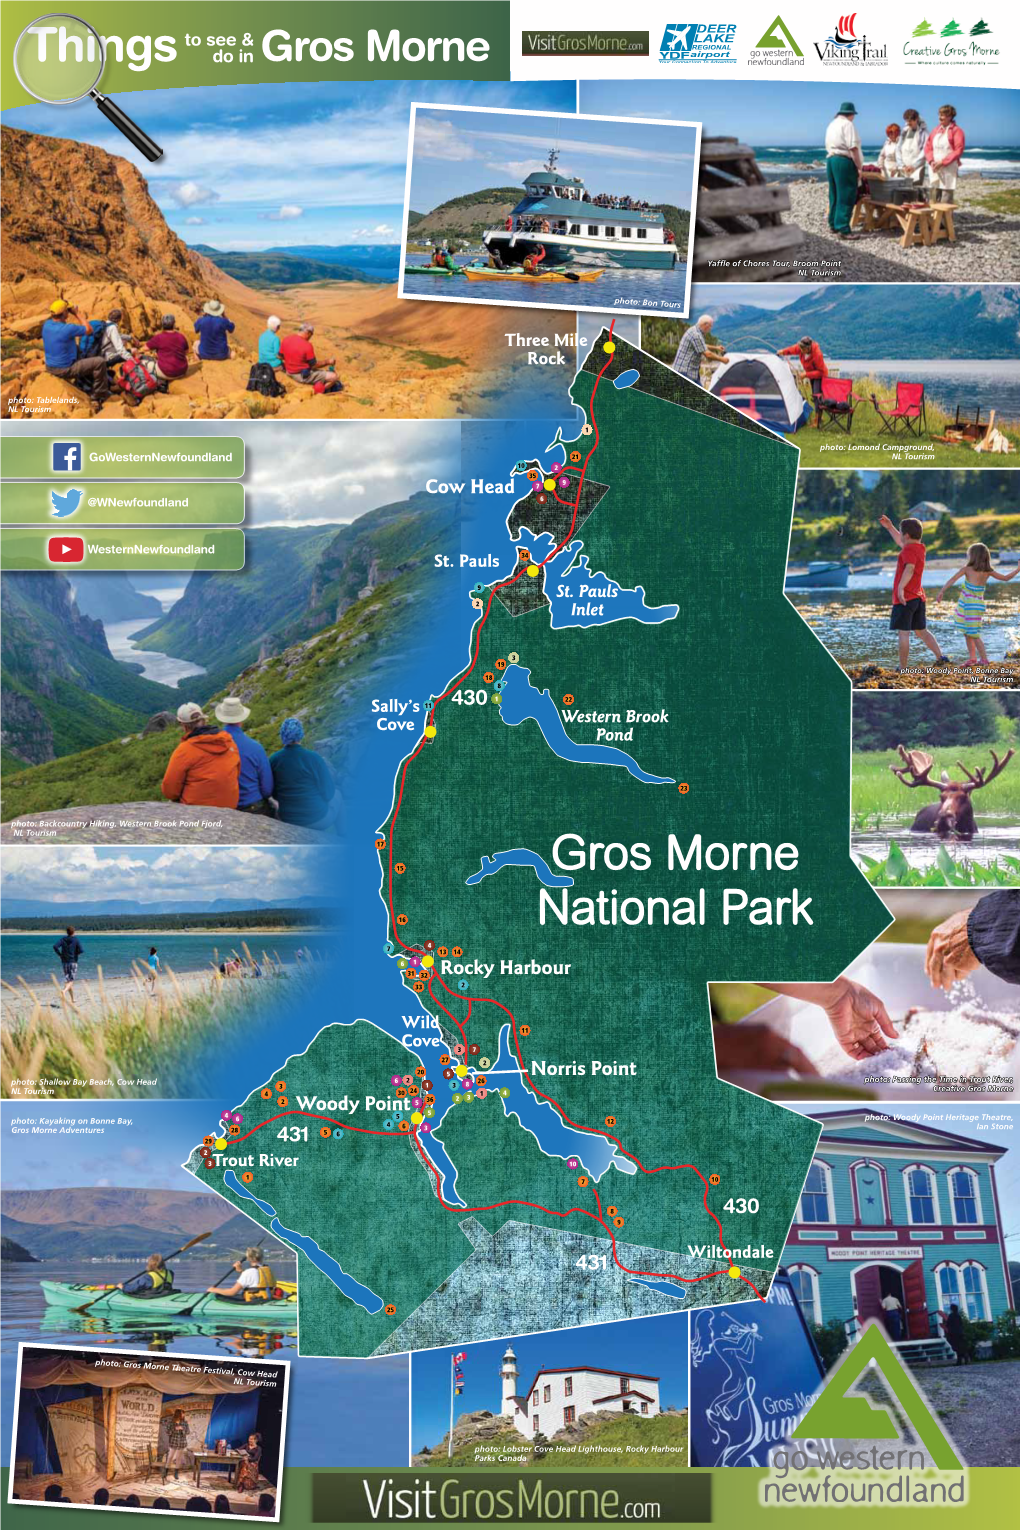 Gros Morne National Park Was Designated This Map Is Your Guide to Summer Adventure a UNESCO World Heritage Site in 1987 for in Gros Morne